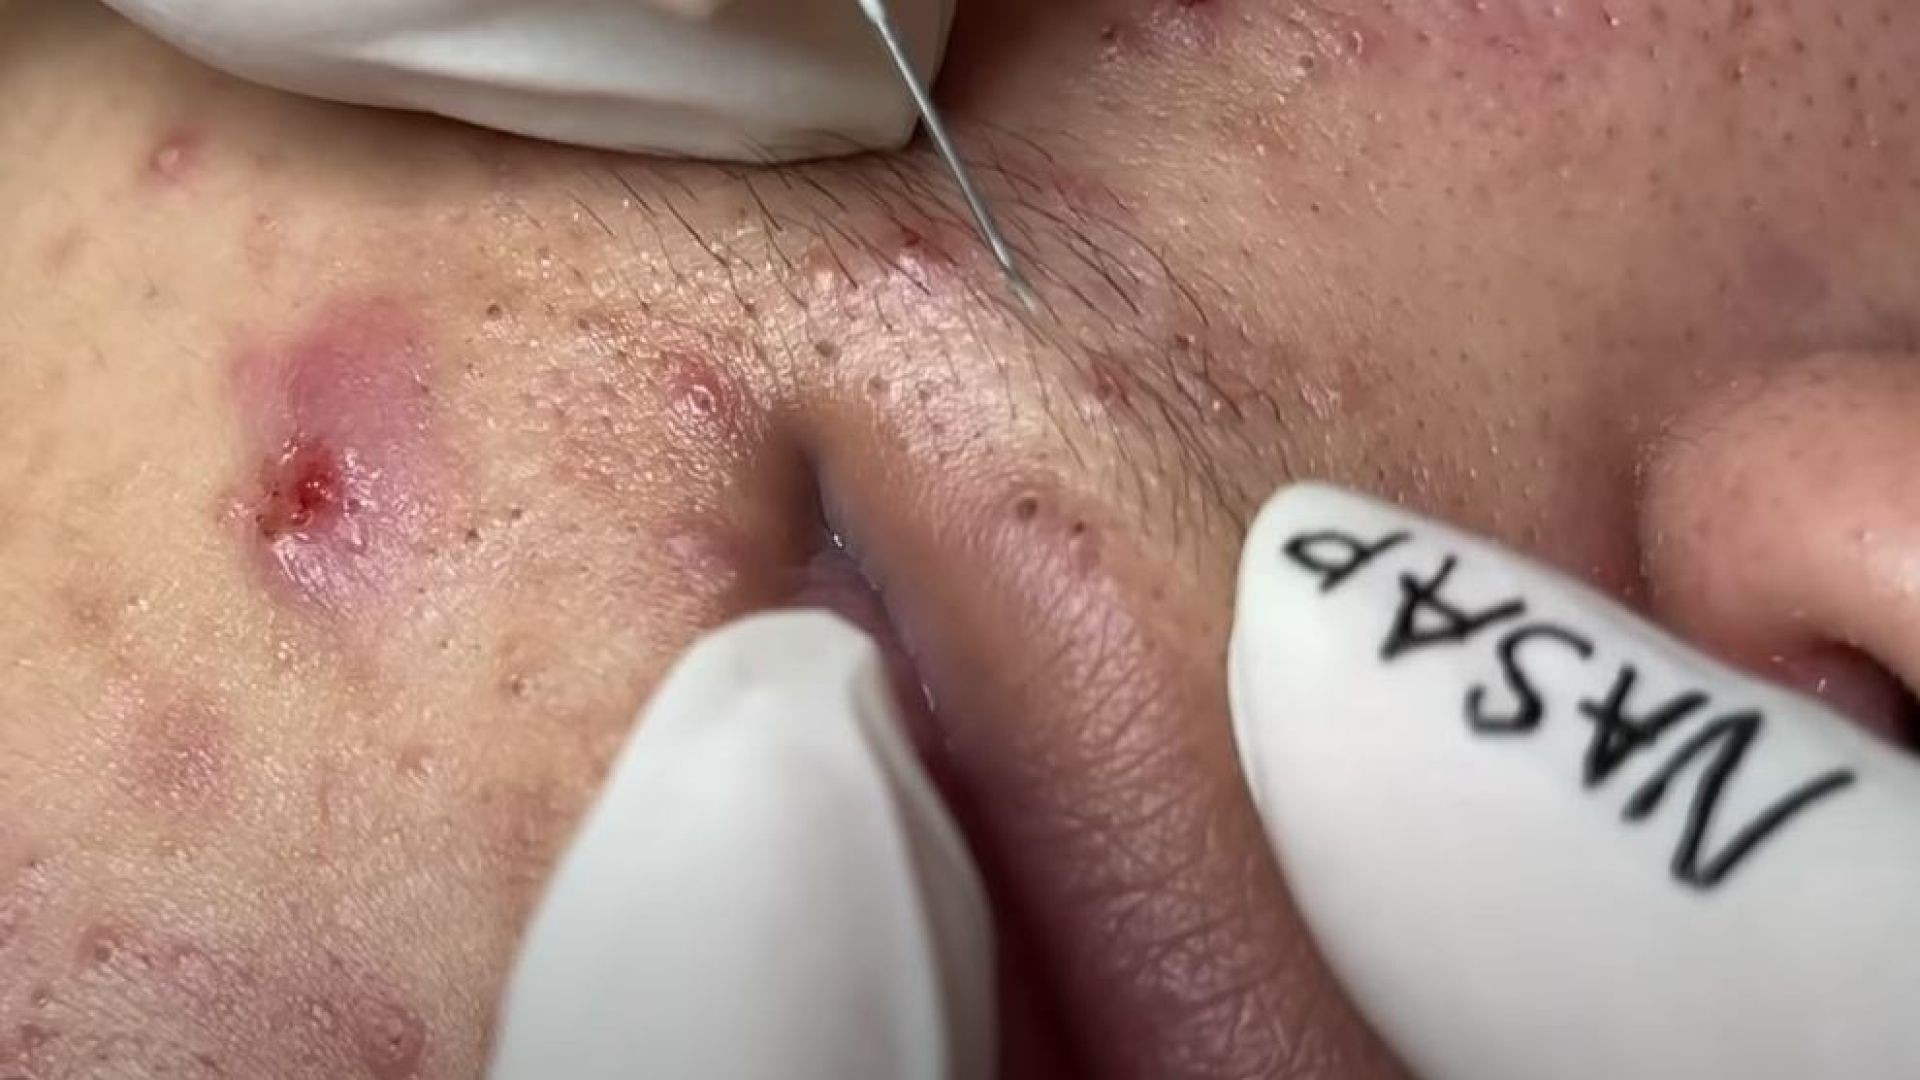 TREATMENT OF BLACKHEADS, HIDDEN ACNE IN THE MOUTH